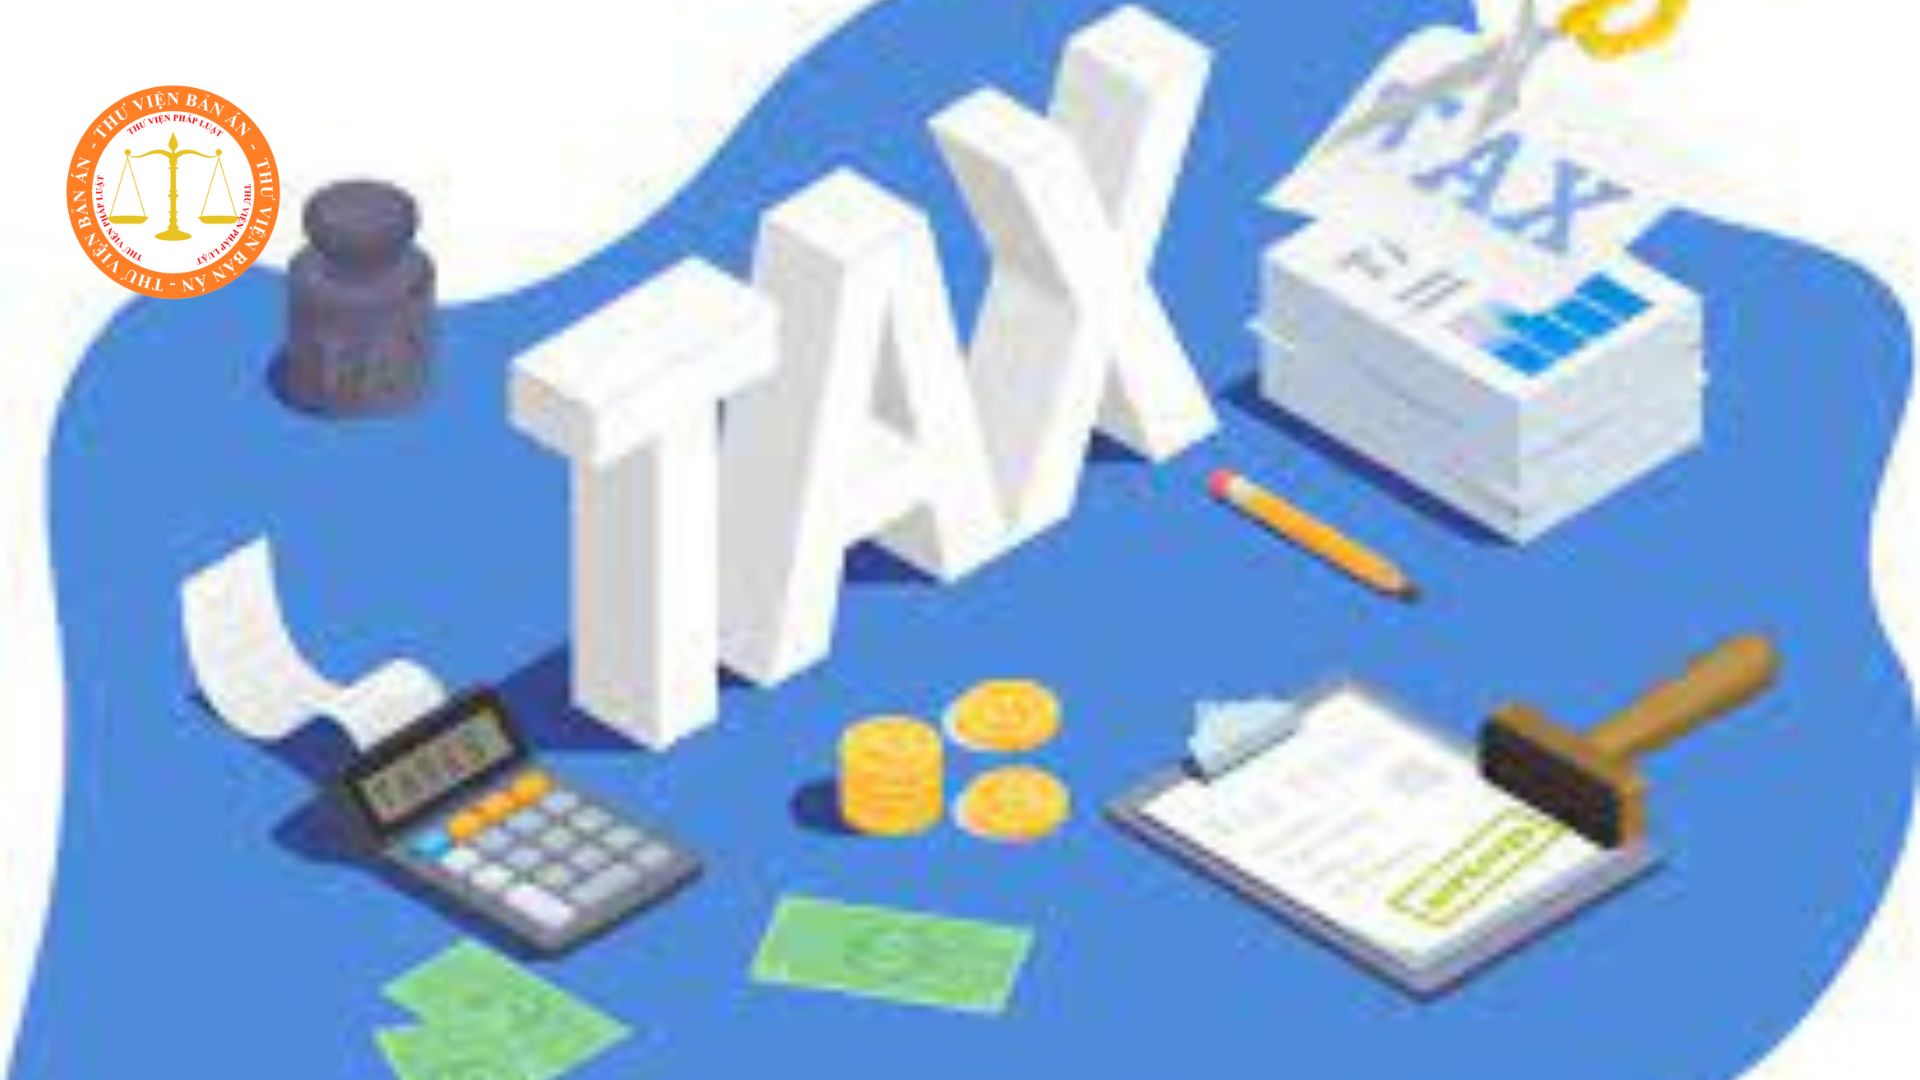 Goods and services that are not subject to value added tax (VAT) in Vietnam